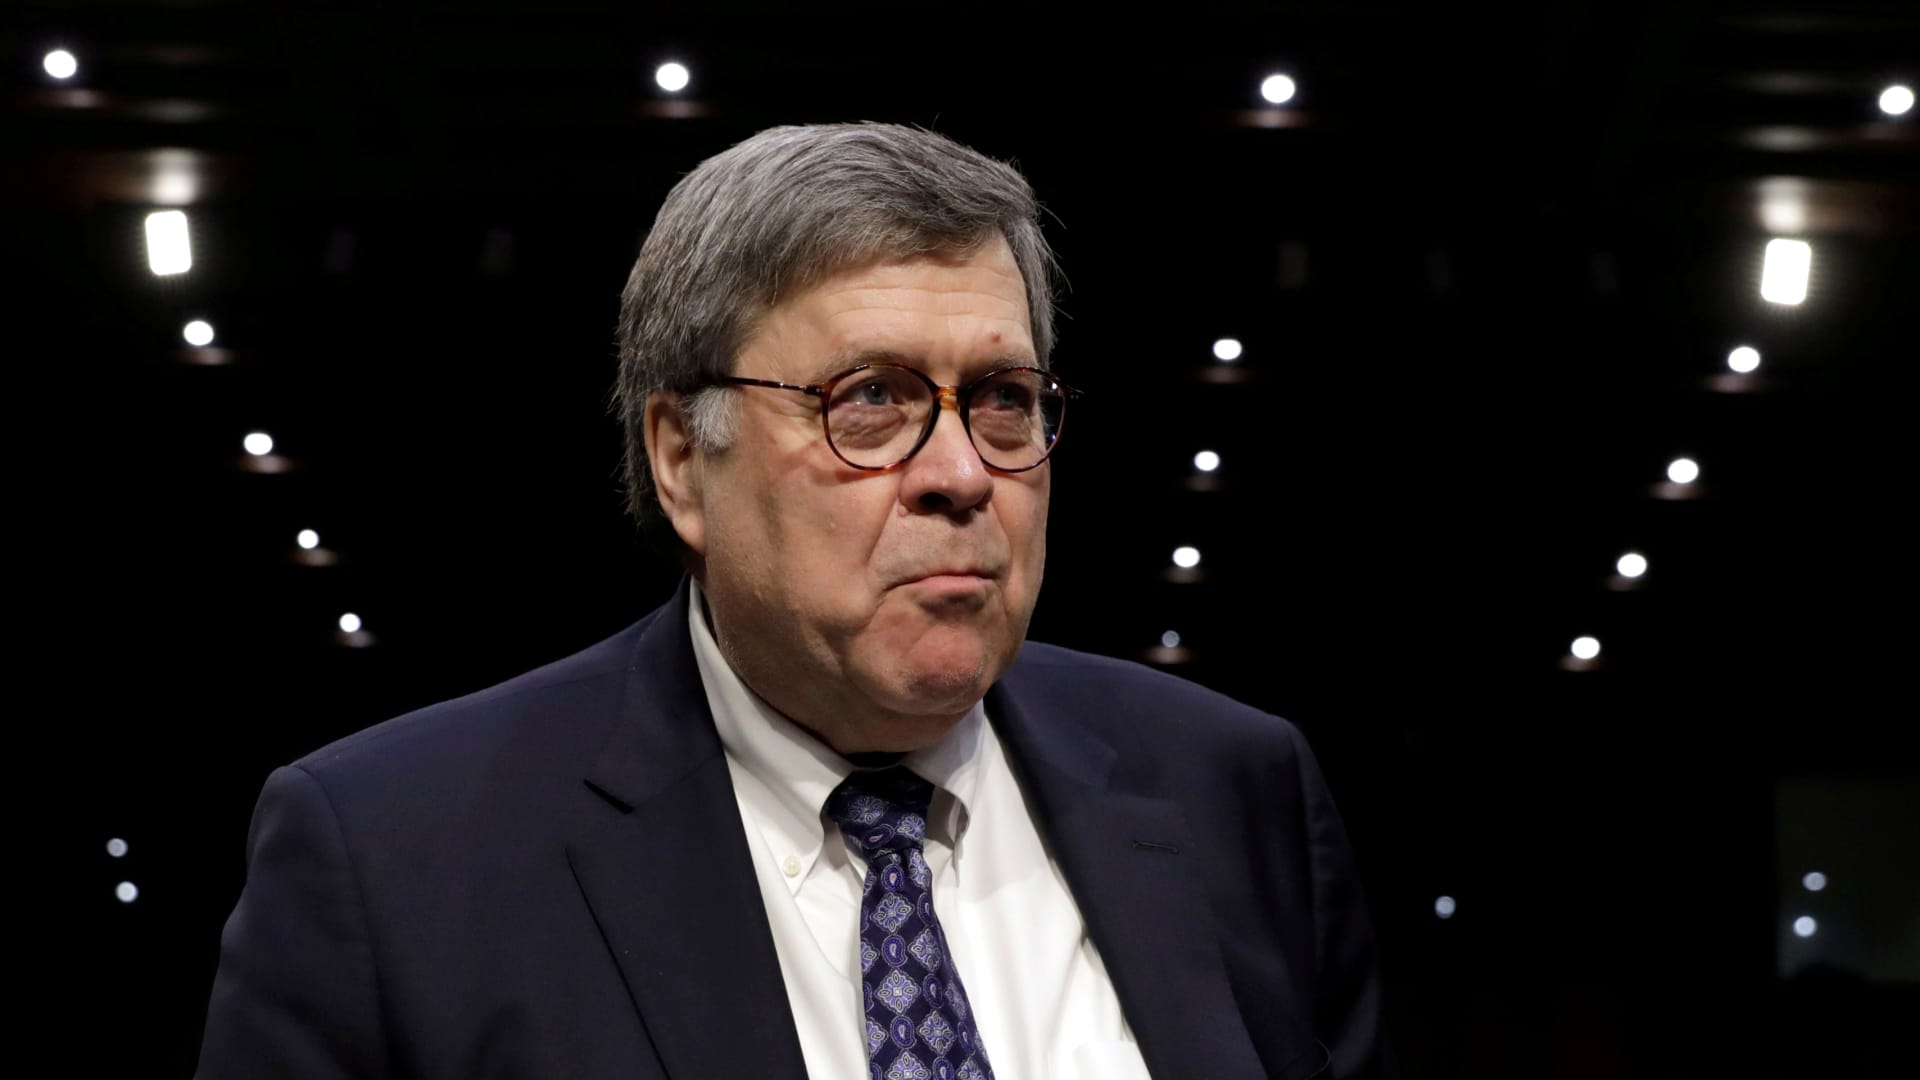 William Barr takes a seat after a break in his Senate Judiciary Committee hearing on his nomination to be attorney general of the United States on Capitol Hill in Washington, U.S., January 15, 2019.